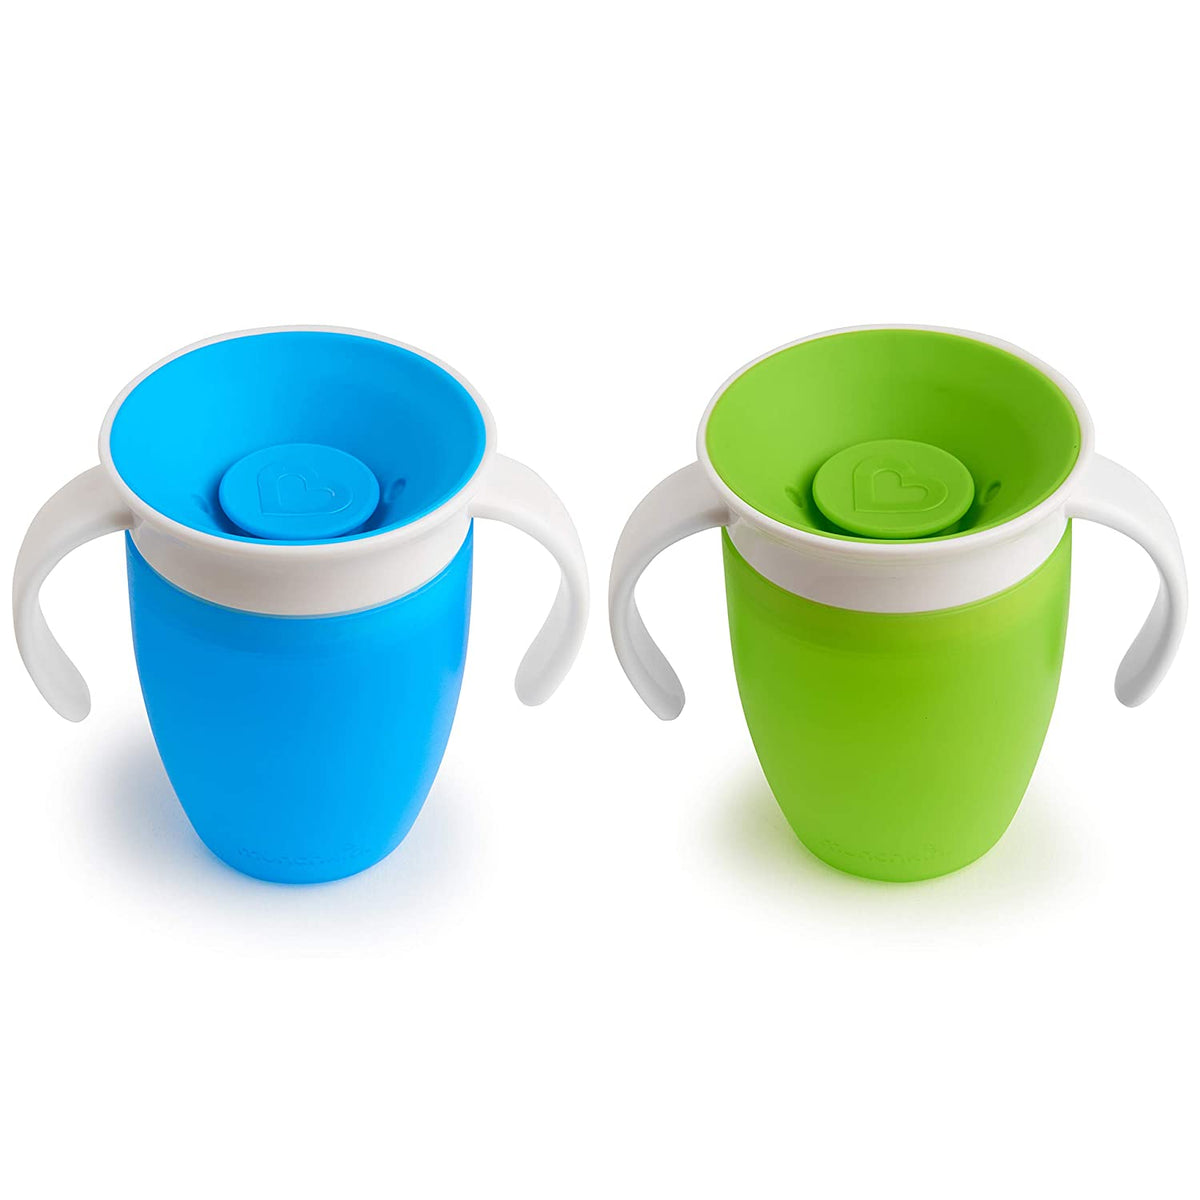 Munchkin Miracle 360 Trainer Cup (Green/Green)